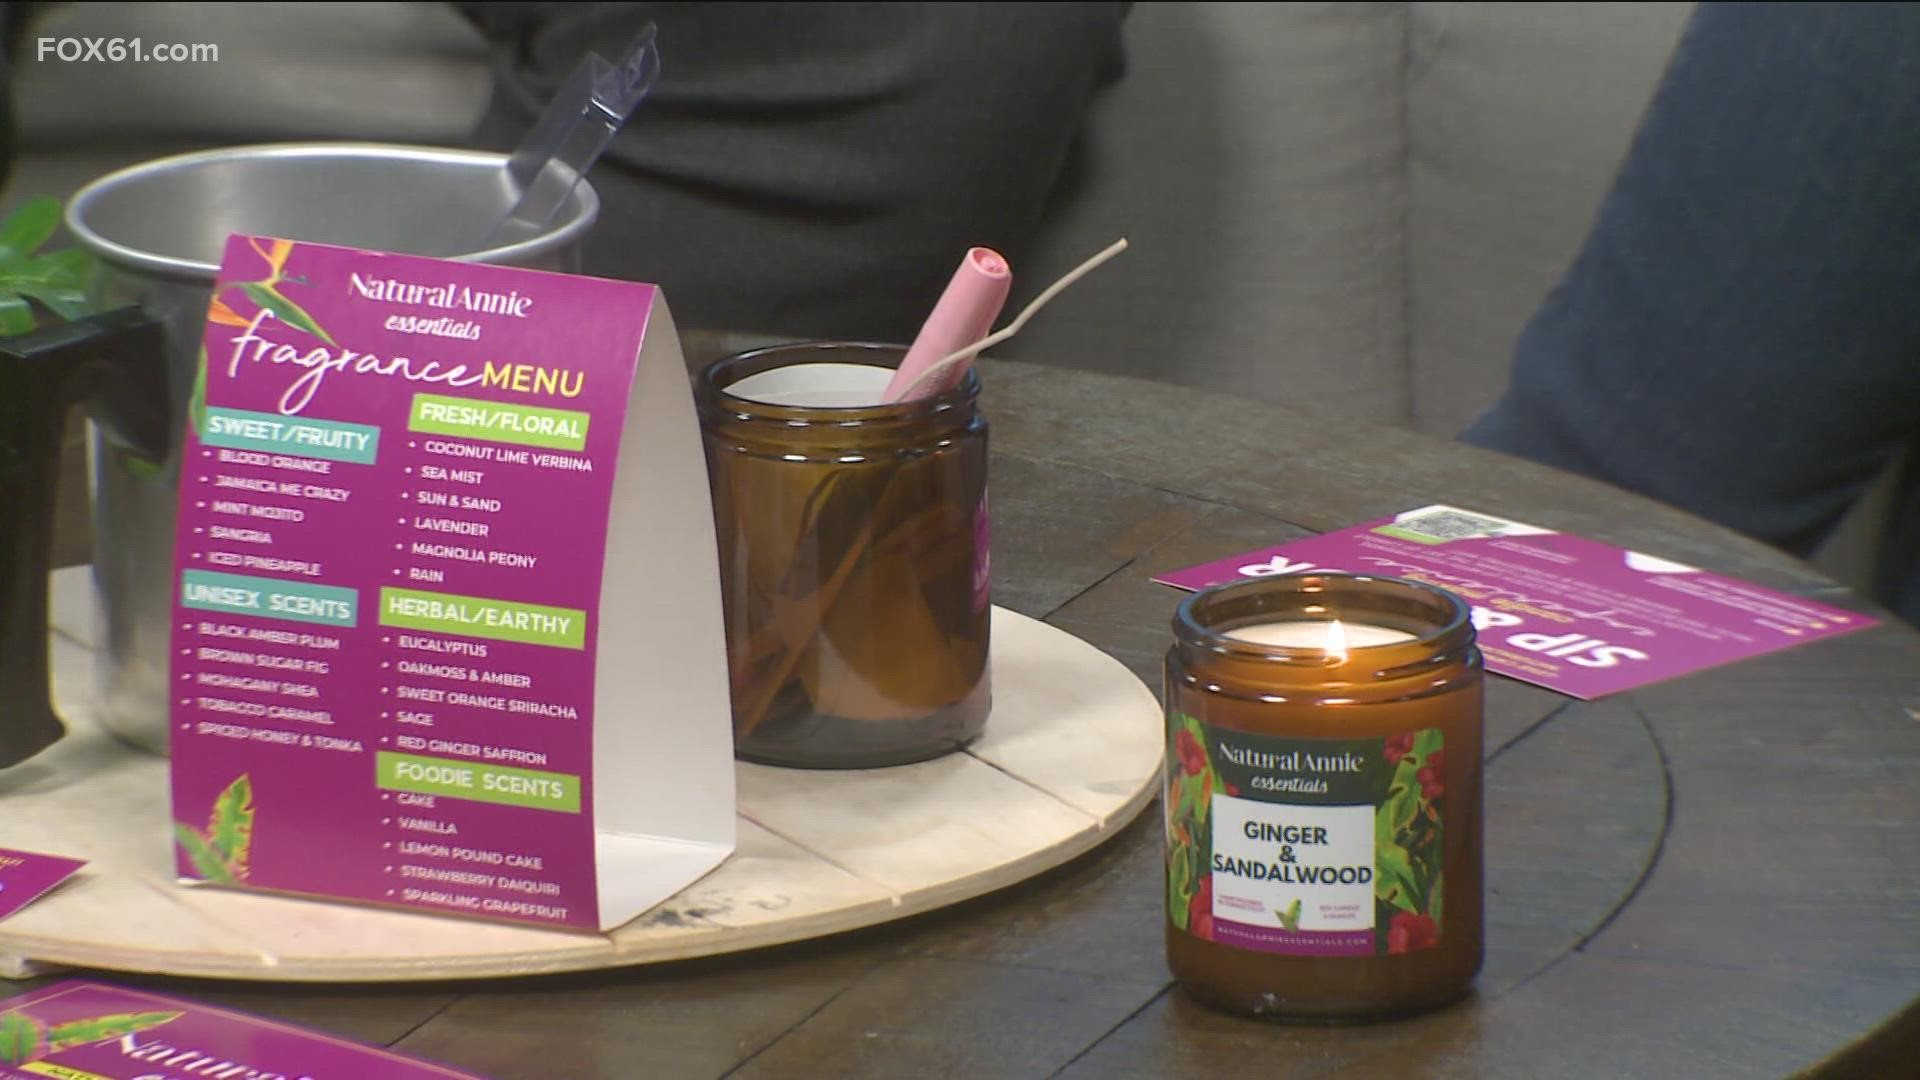 Natural Annie Essentials is a woman-owned, Black-owned business in Connecticut that offers a line of candles. They also offer candle-making parties.